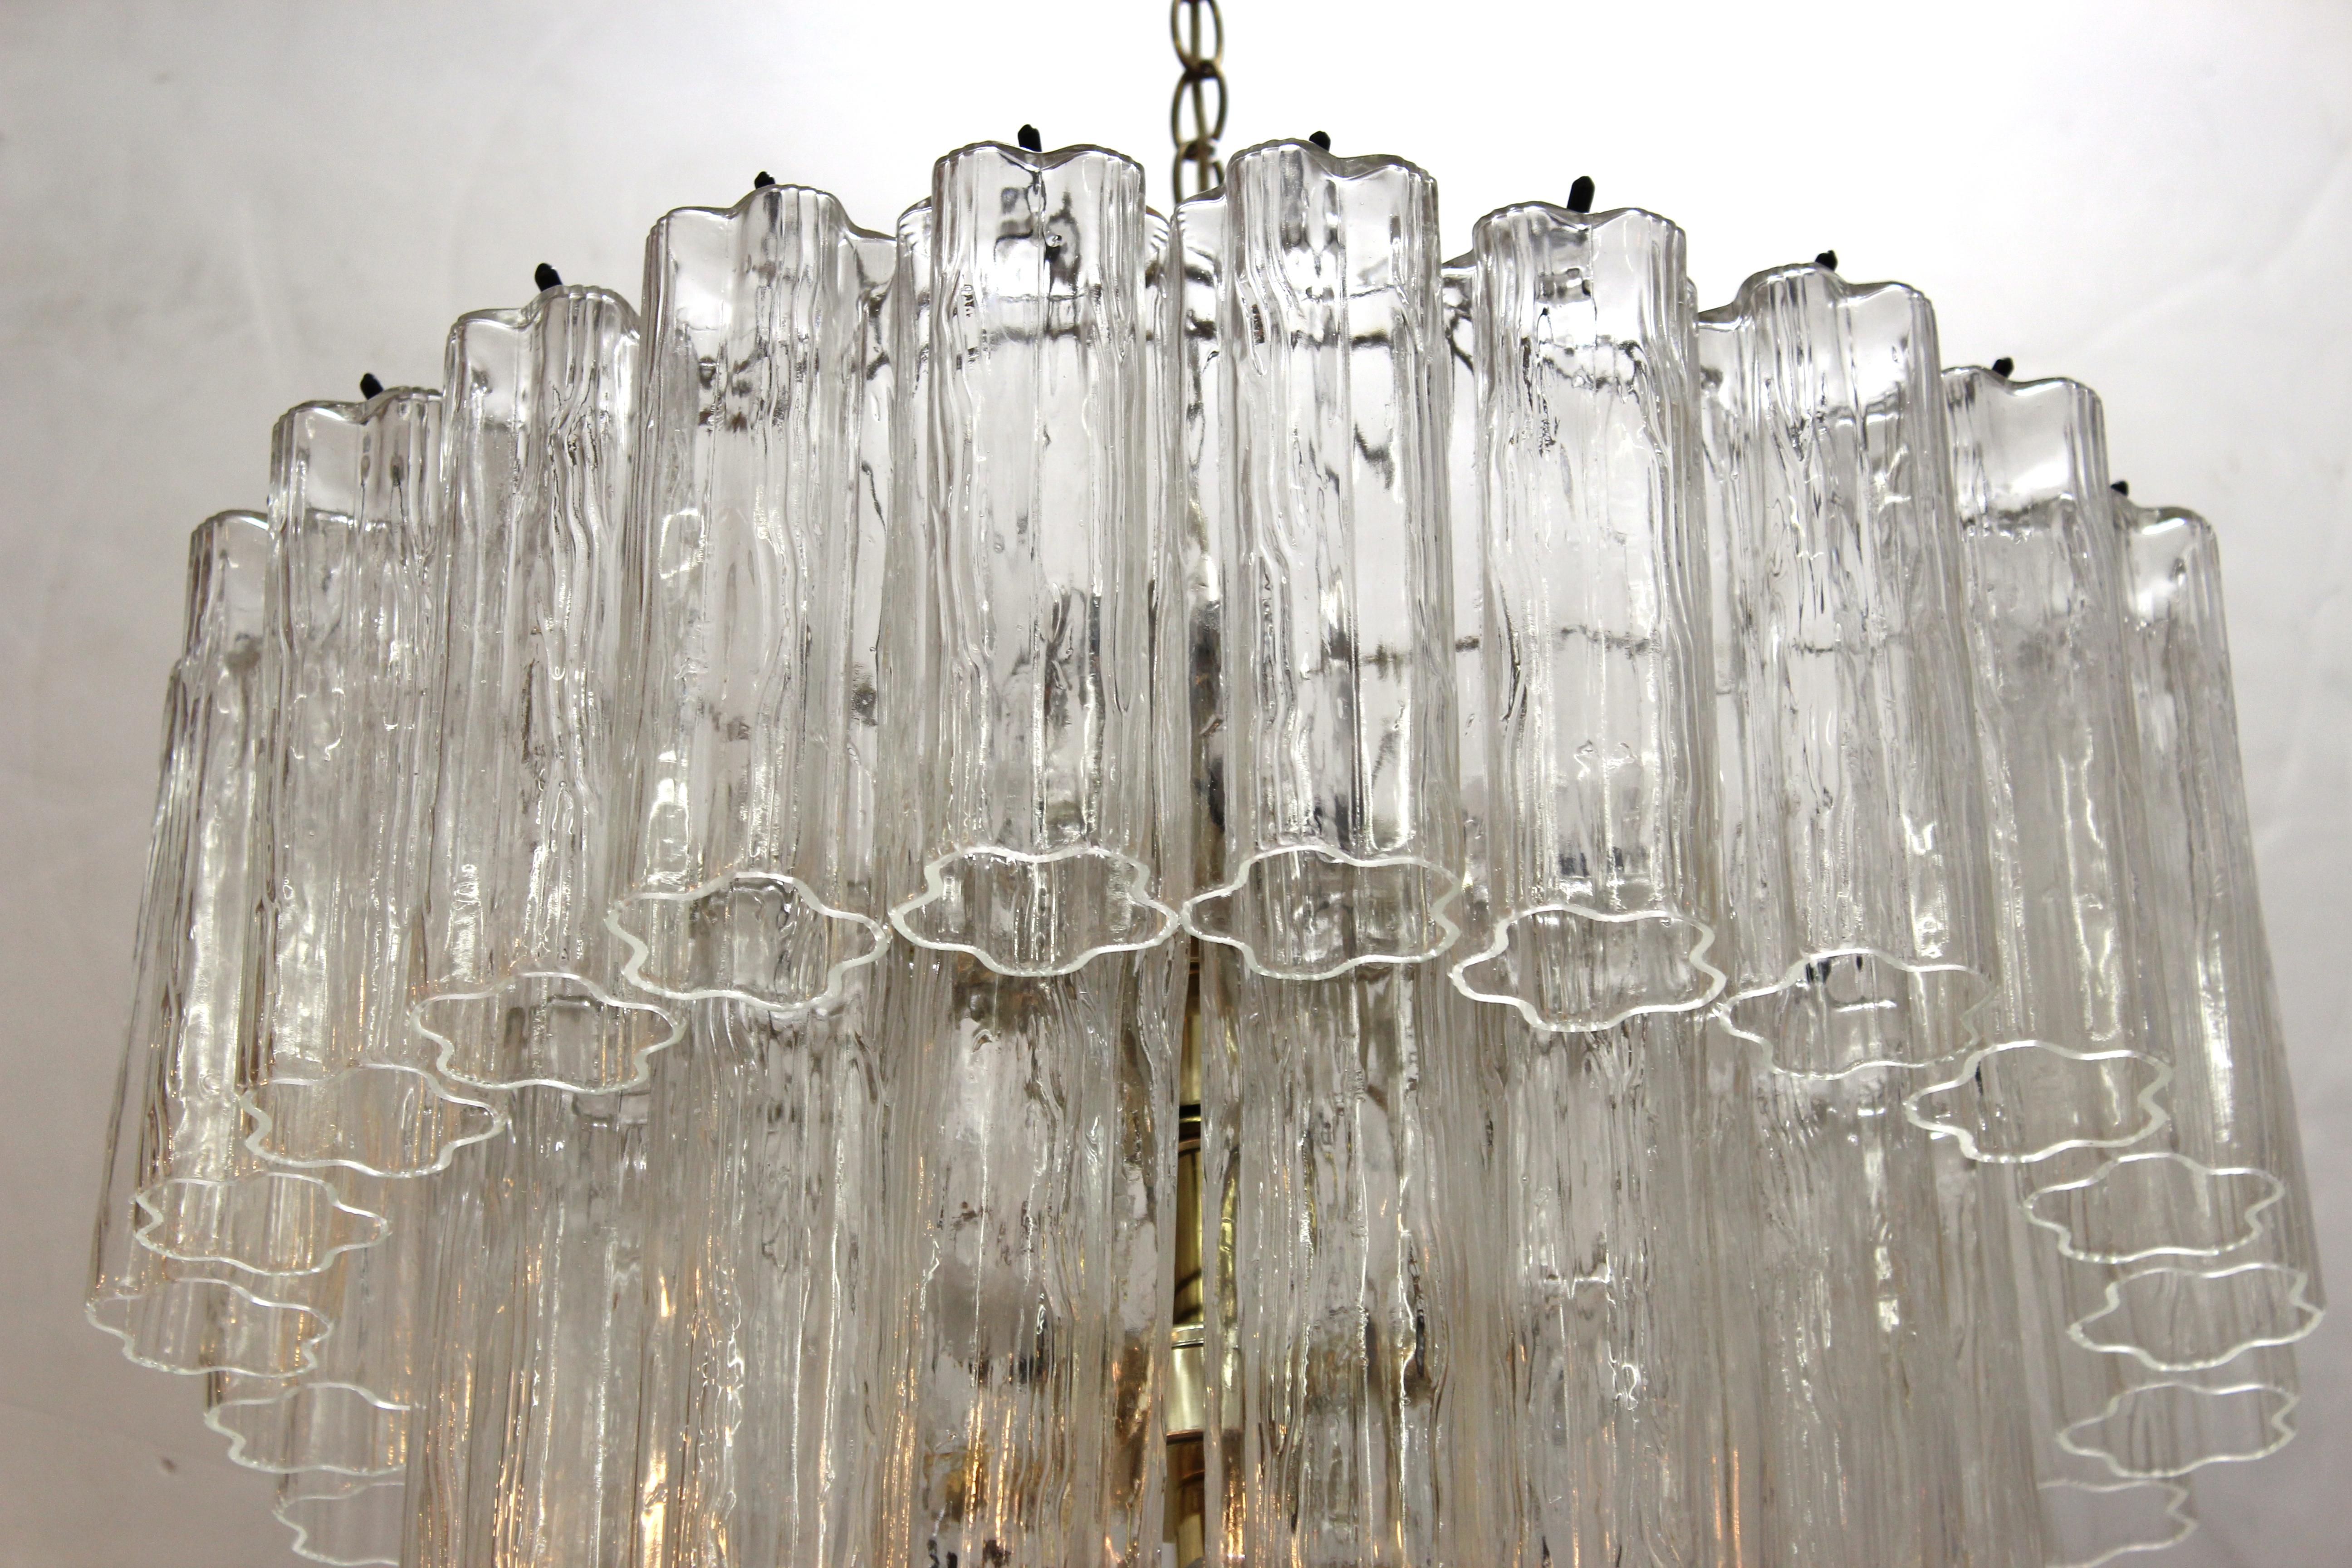 Mid-Century Modern Murano glass chandelier with three tiers. The piece was manufactured in Italy and is in great vintage condition.